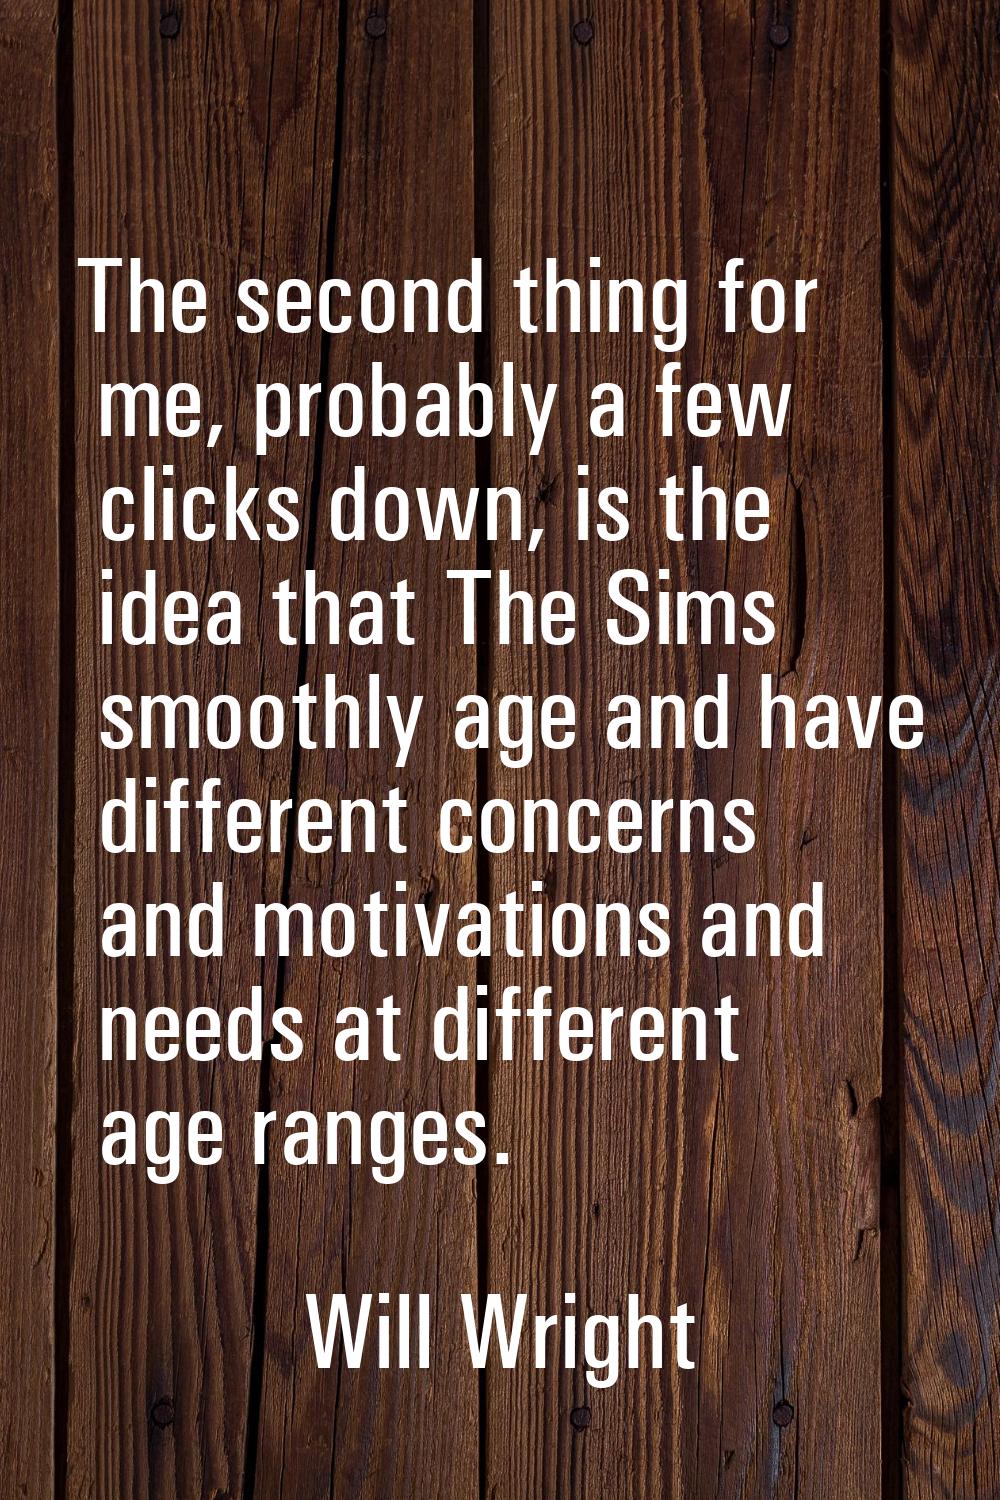 The second thing for me, probably a few clicks down, is the idea that The Sims smoothly age and hav